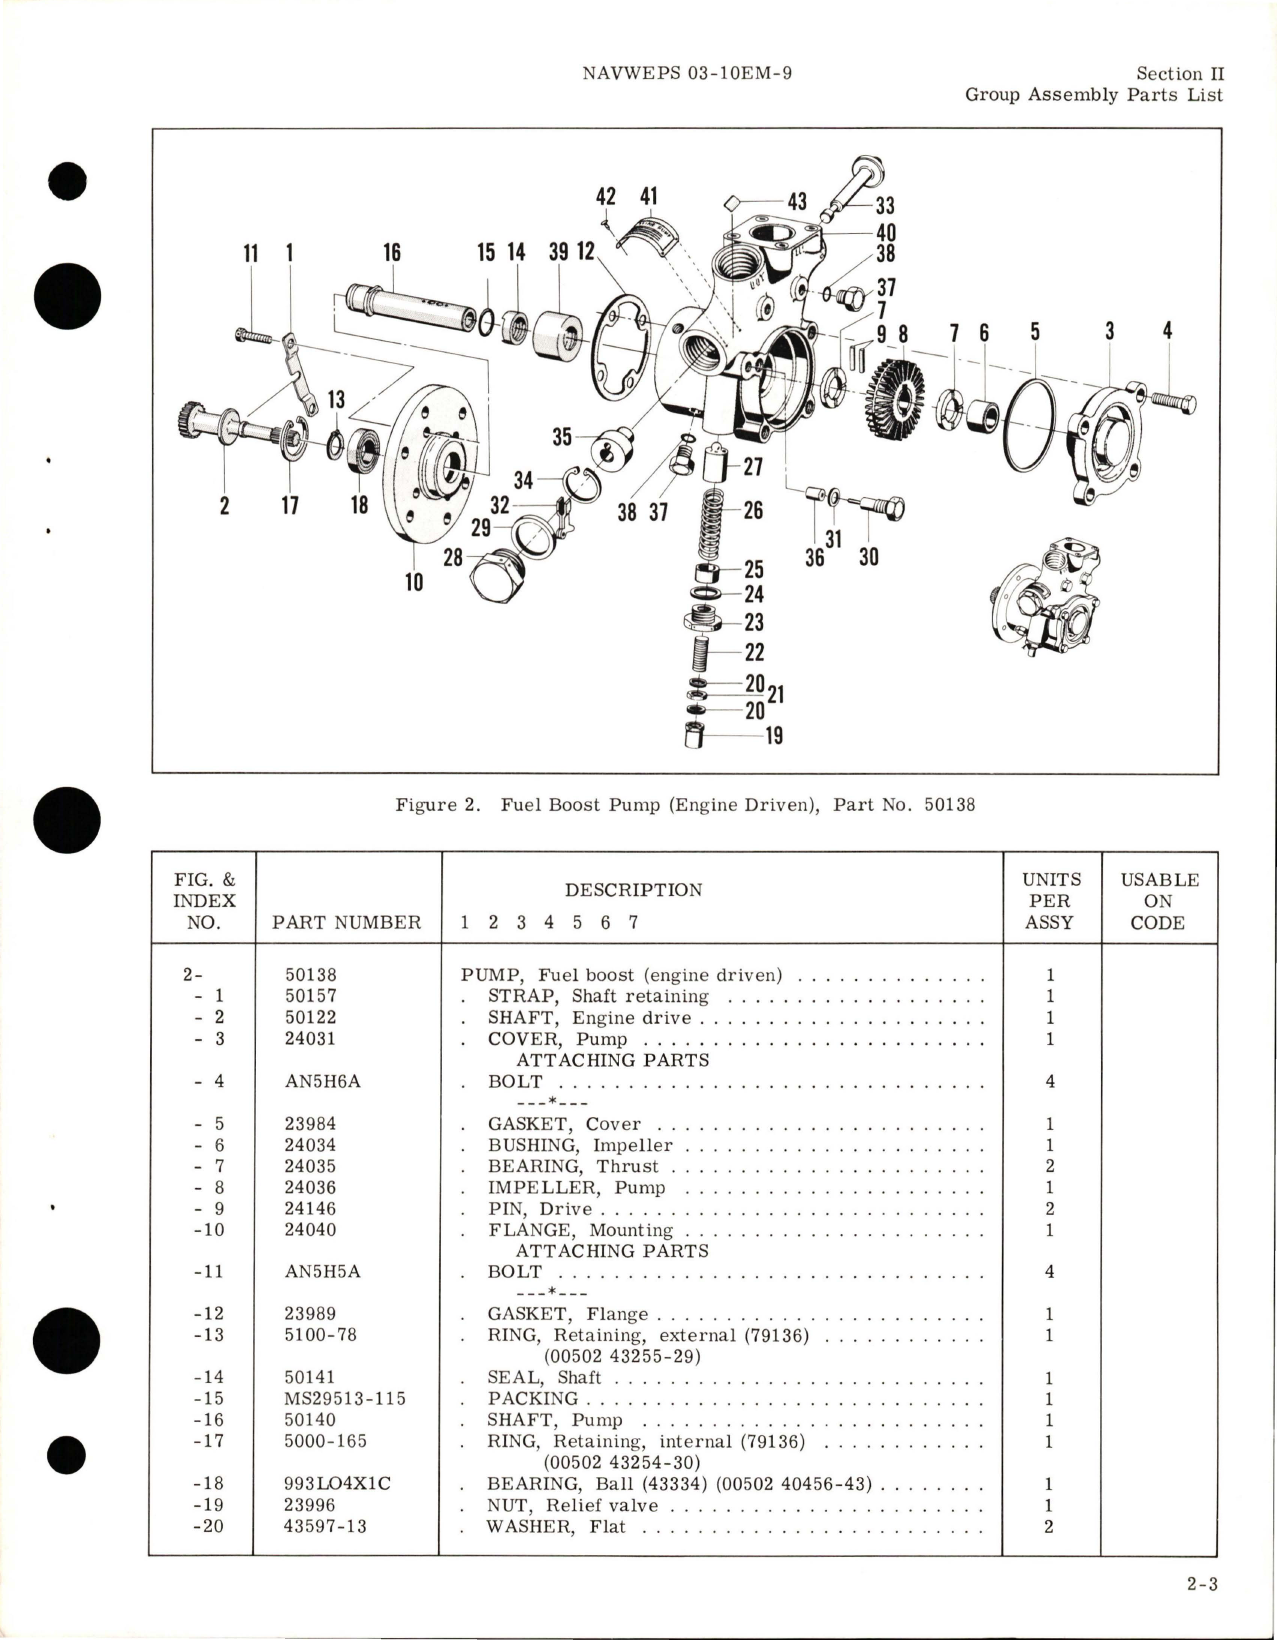 Sample page 9 from AirCorps Library document: Illustrated Parts Breakdown for Fuel Boost Pump (Engine Driven) - Part 23900 and 50138 